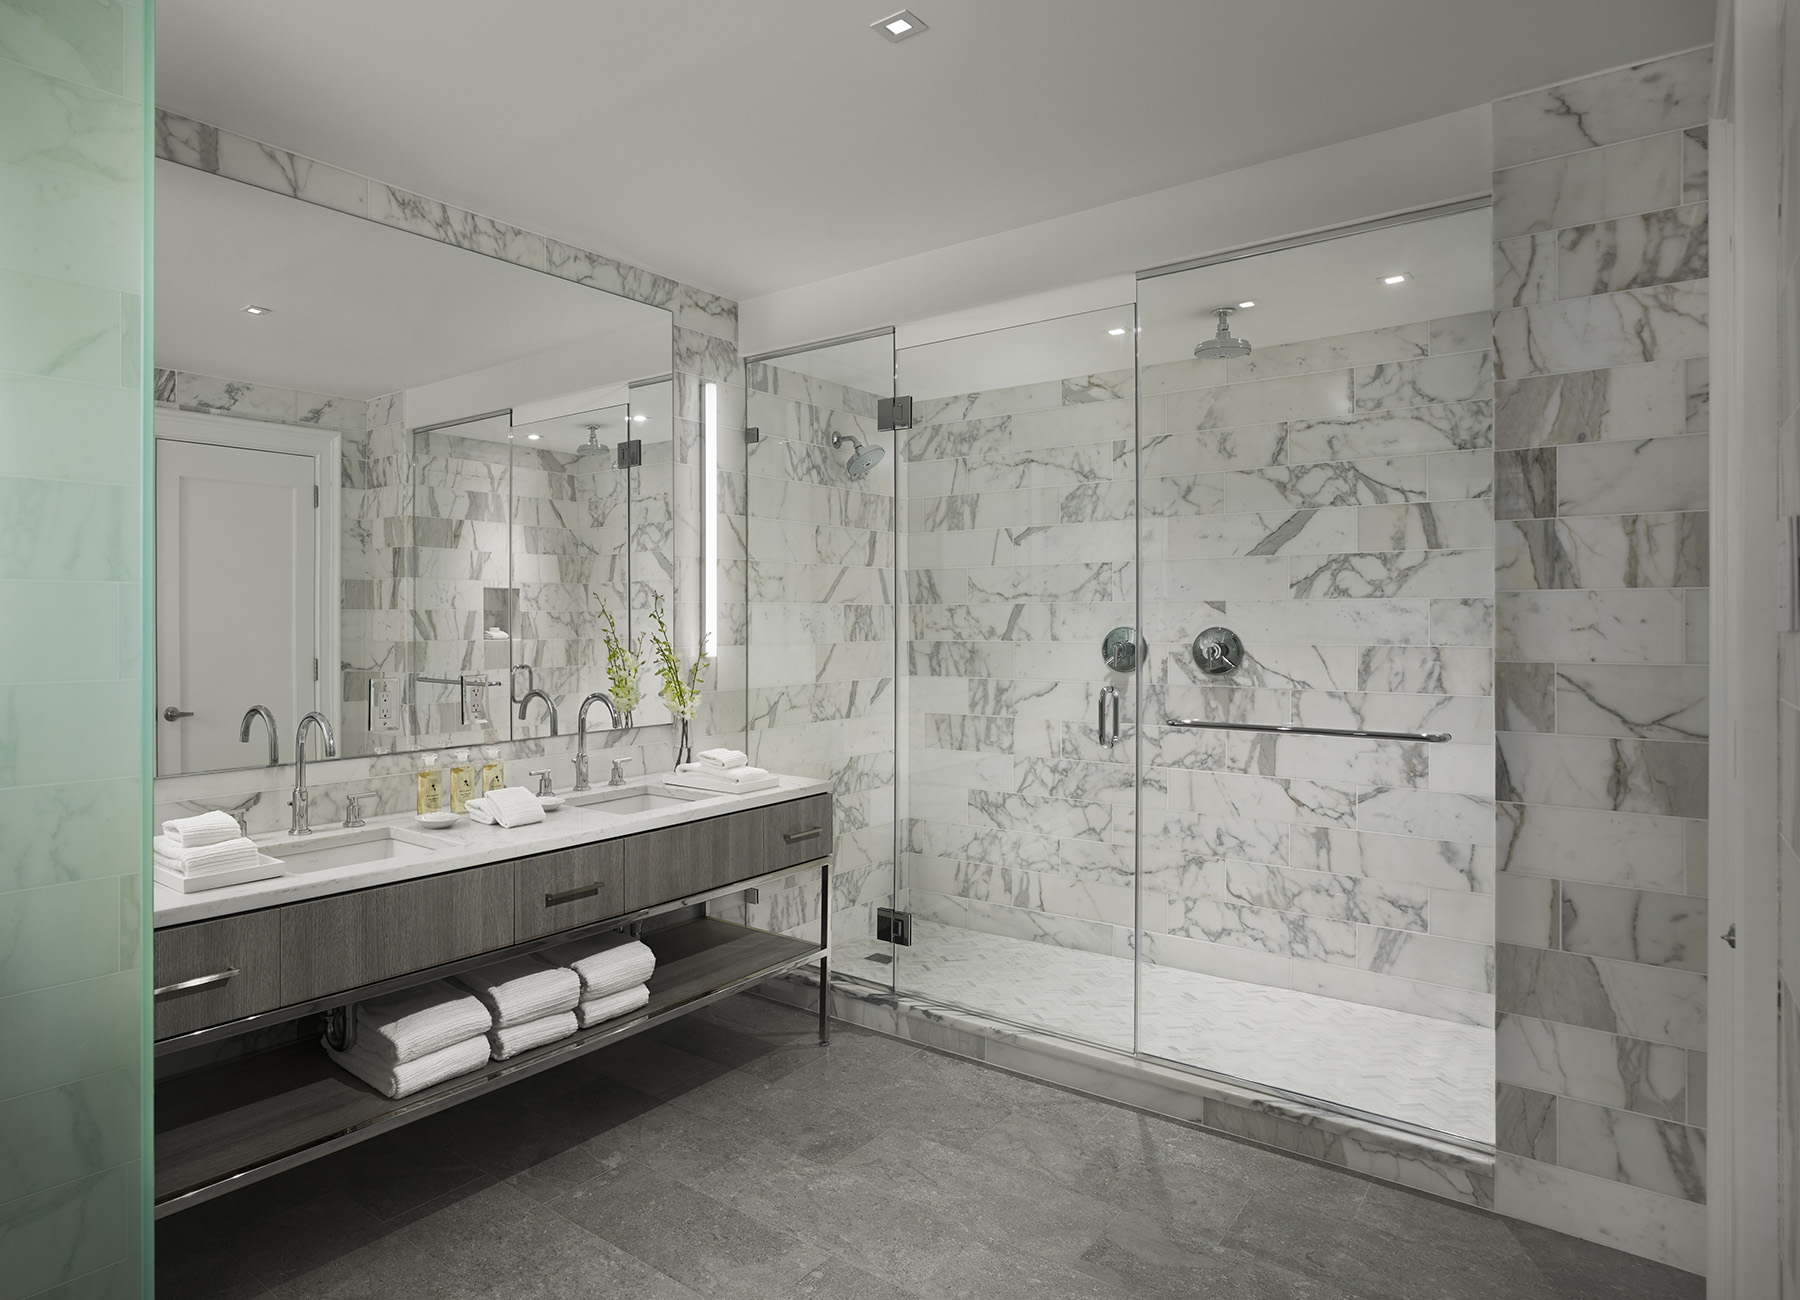 AKA Rittenhouse Square penthouse bathroom with gray marble finishes, vanity, and walk-in shower